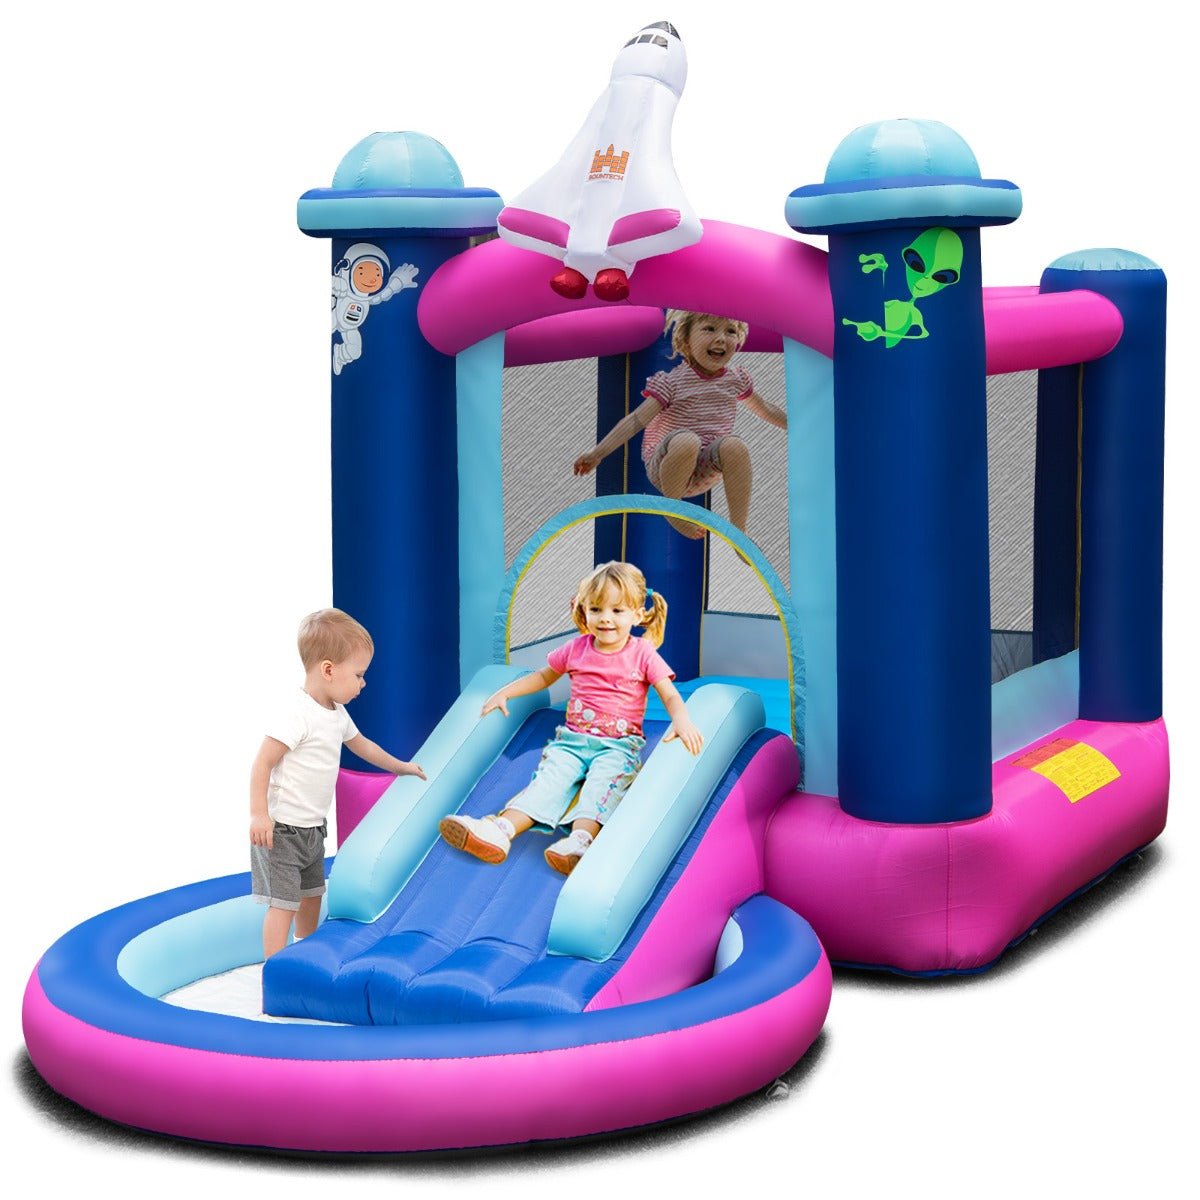 Kids Inflatable Space Bouncer with Slide & Jumping Area - Cosmic Excitement